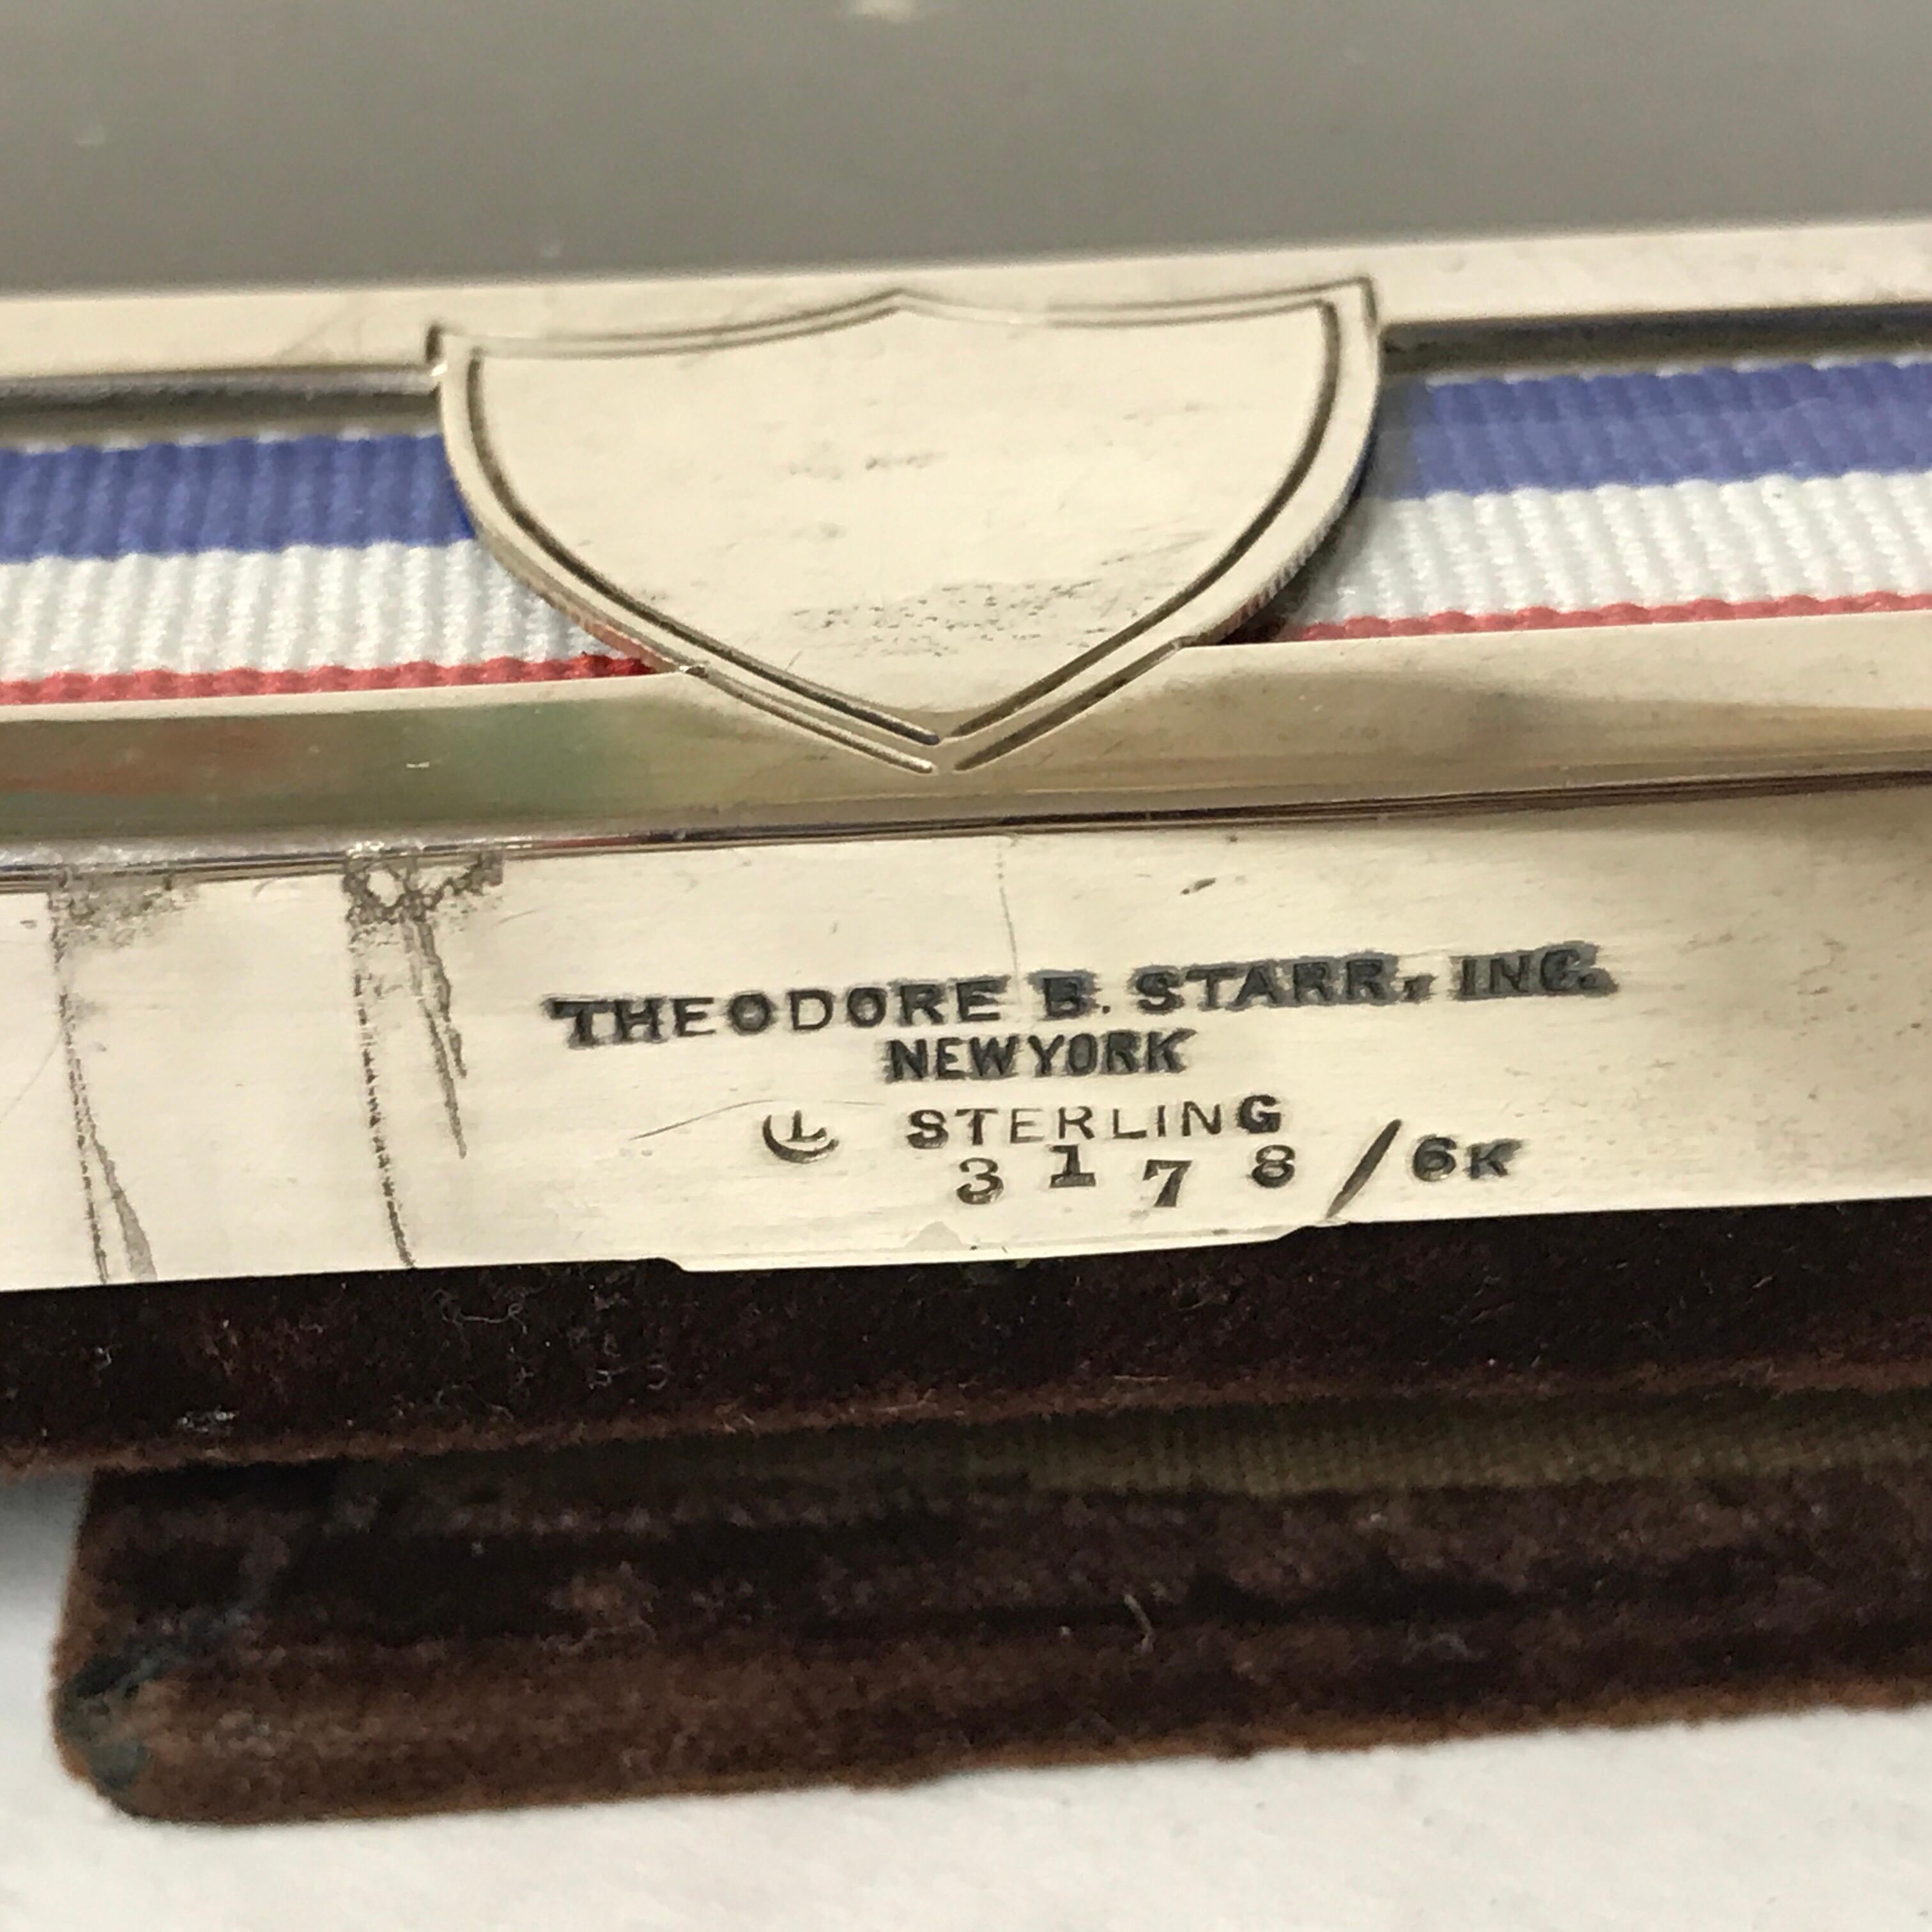 US Military Sterling and Gold US Emblem Motif Frame, WWI Era, Theodore B. Starr 6